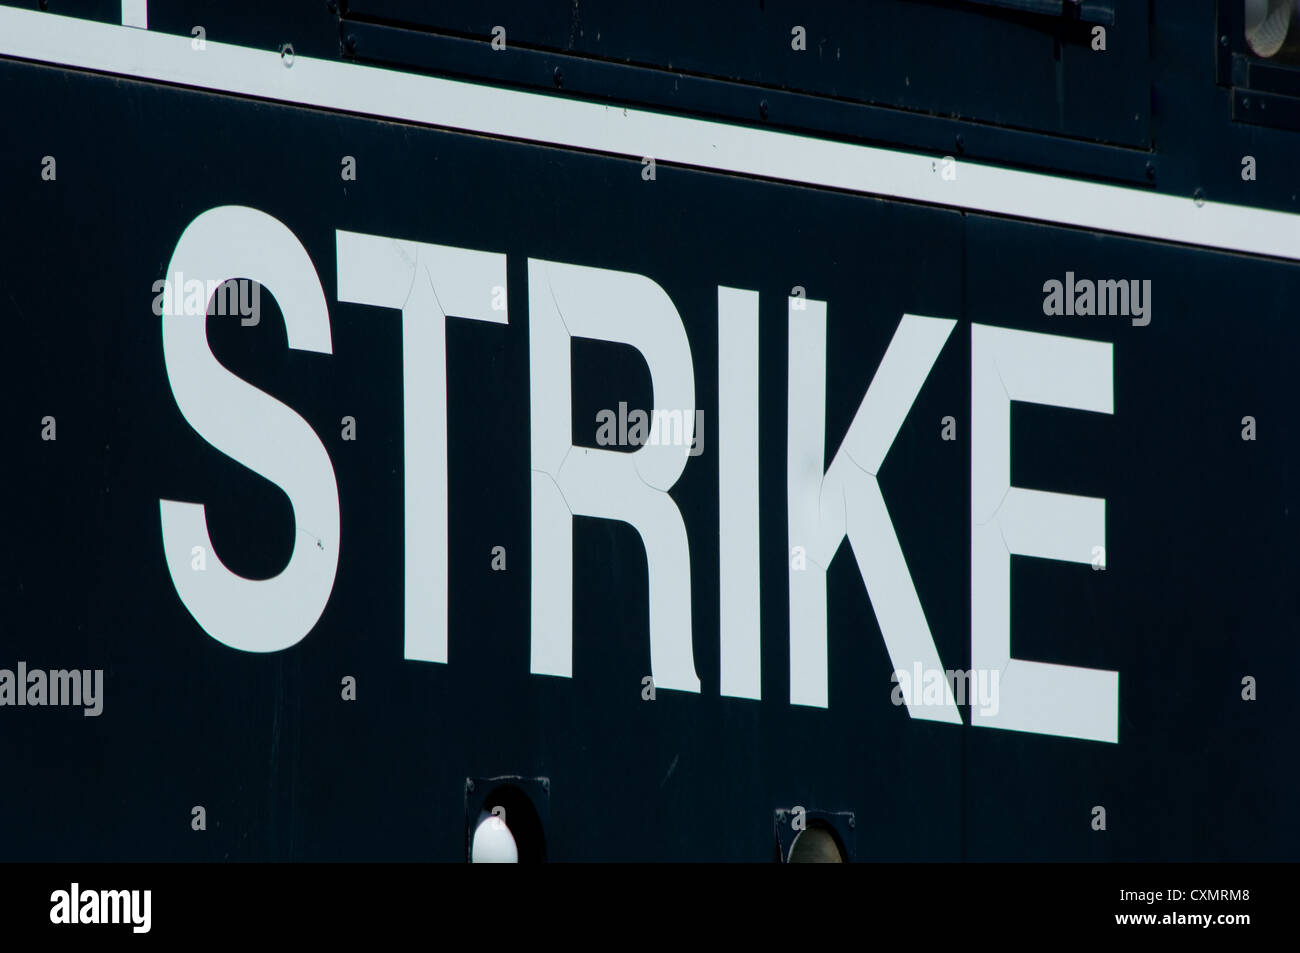 Scoreboard signage with the word STRIKE at a baseball or softball field Stock Photo